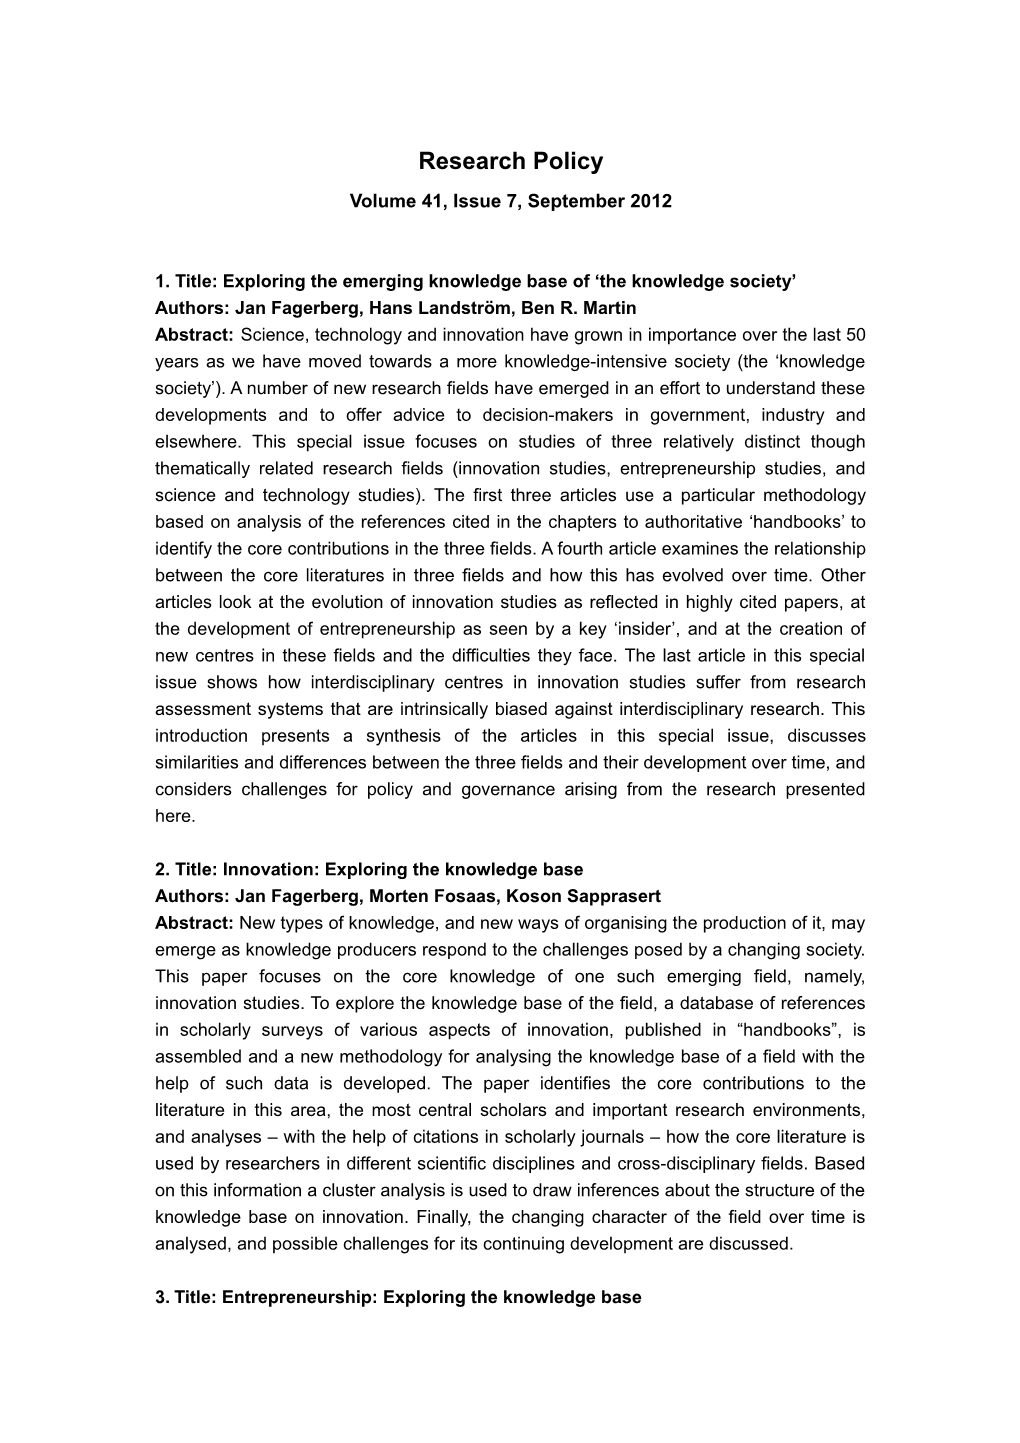 1. Title: Exploring the Emerging Knowledge Base of the Knowledge Society